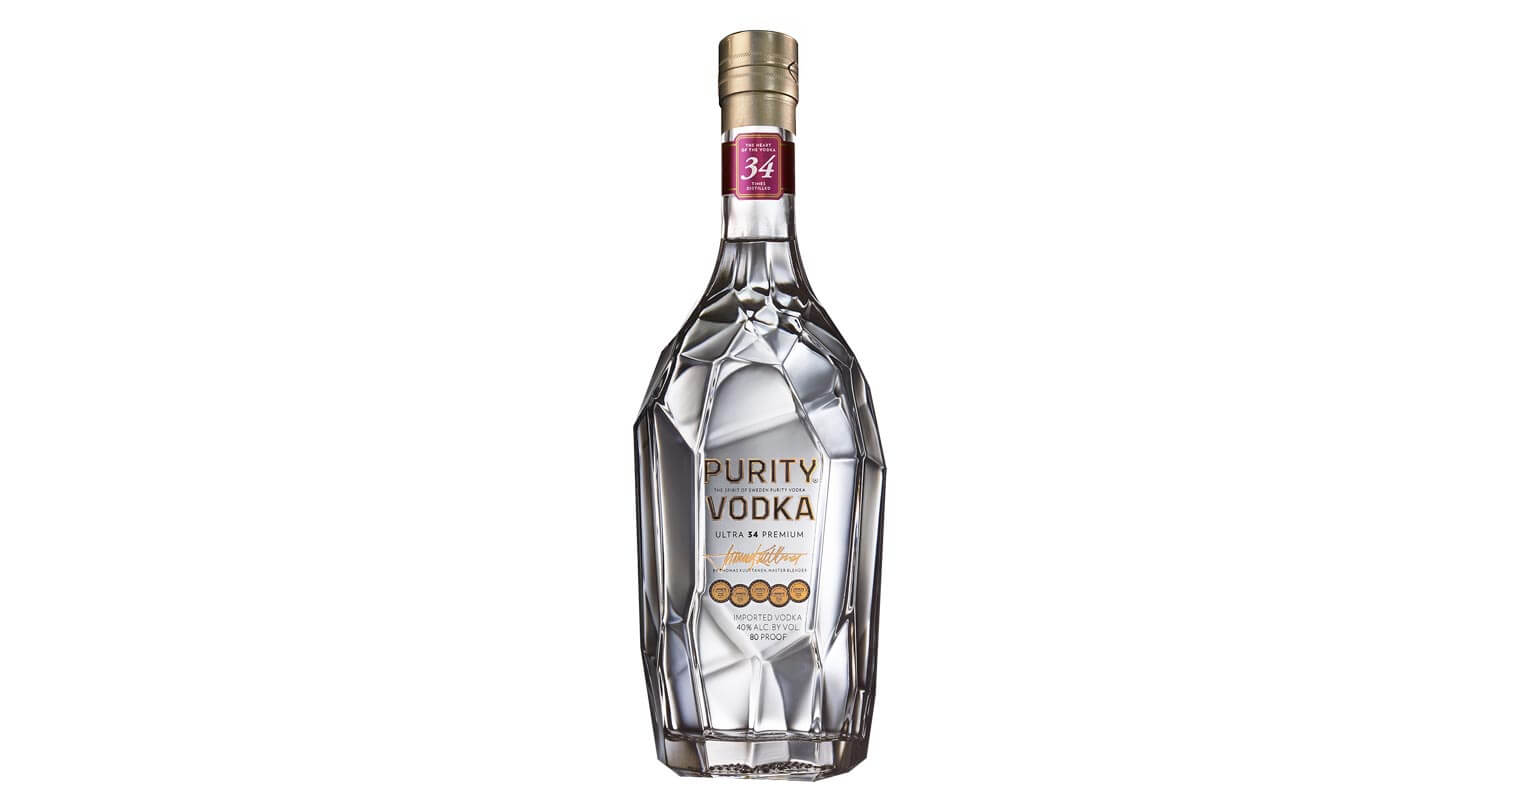 Purity Vodka, bottle on white, featured image